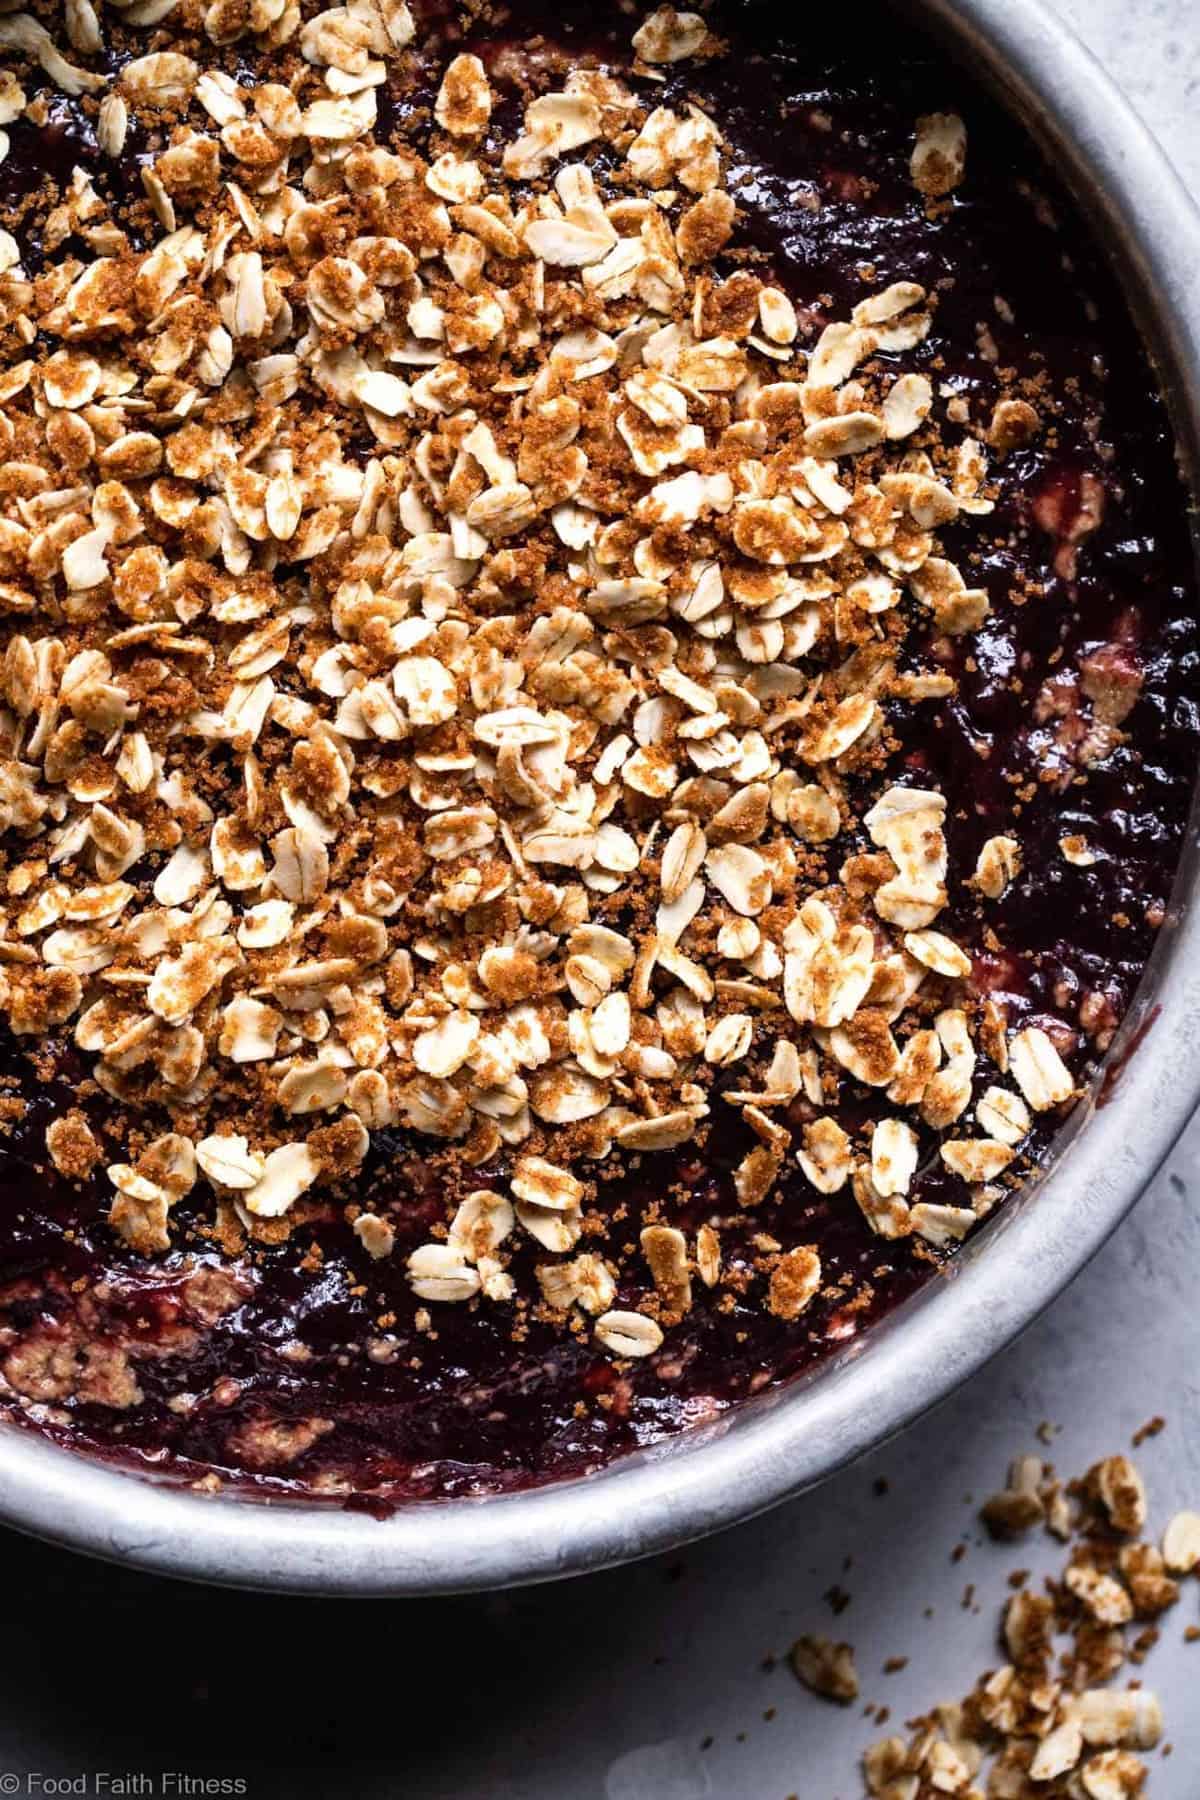 Gluten Free Eggless Coffee Cake - This tender, moist Gluten Free Coffee Cake has a tasty blackberry swirl and is loaded with a crunchy, crispy crumble topping!  It's sure to be a hit and does not taste healthy!  |  #Foodfaithfitness | 